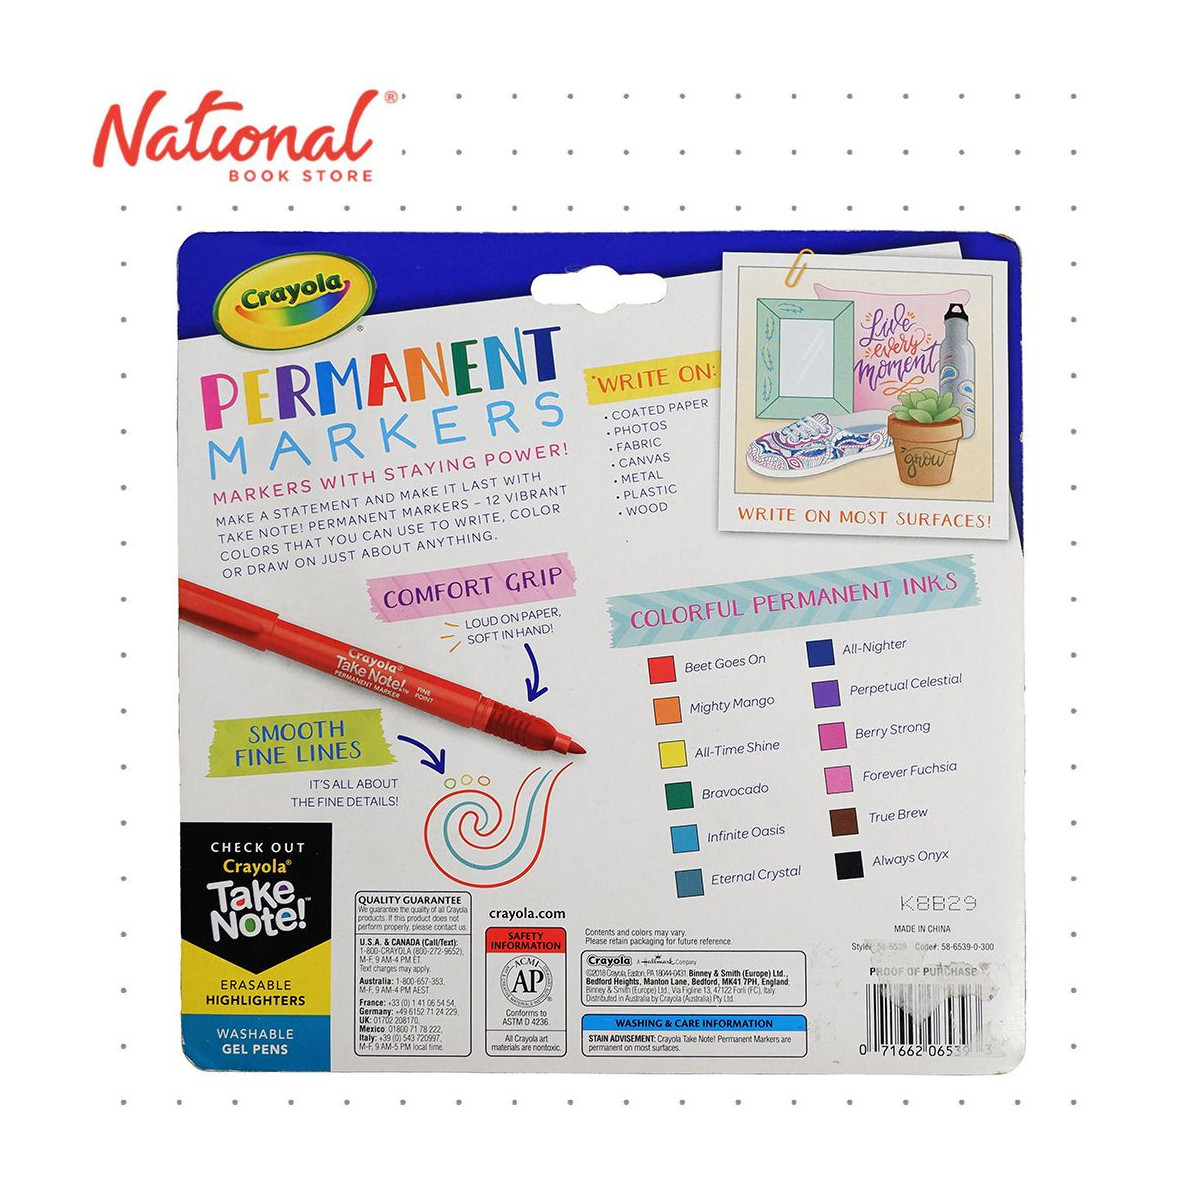 https://www.nationalbookstore.com/121034-thickbox_default/crayola-take-note-permanent-markers-58-6539-12-colors-.jpg